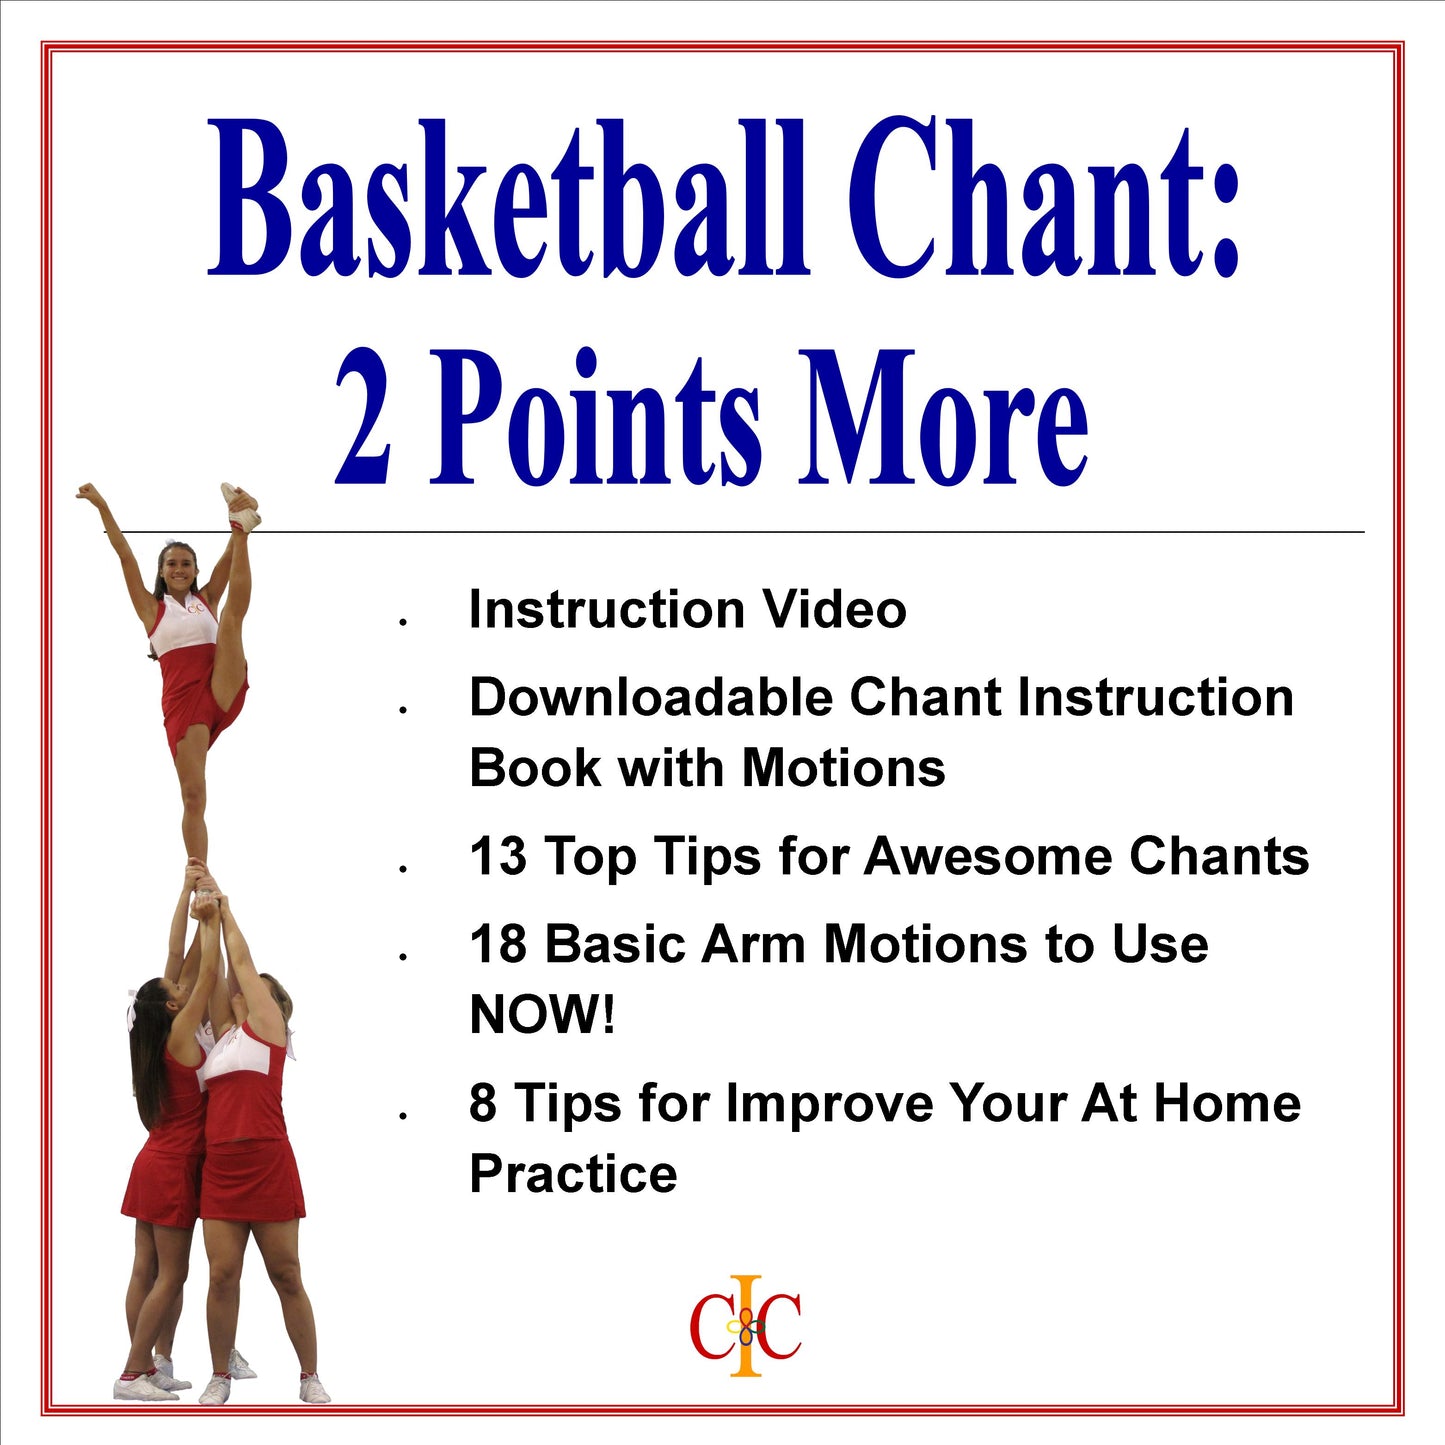 Cheerleading Chant - 2 Points More - Basketball Chant - Cheer and Dance On Demand